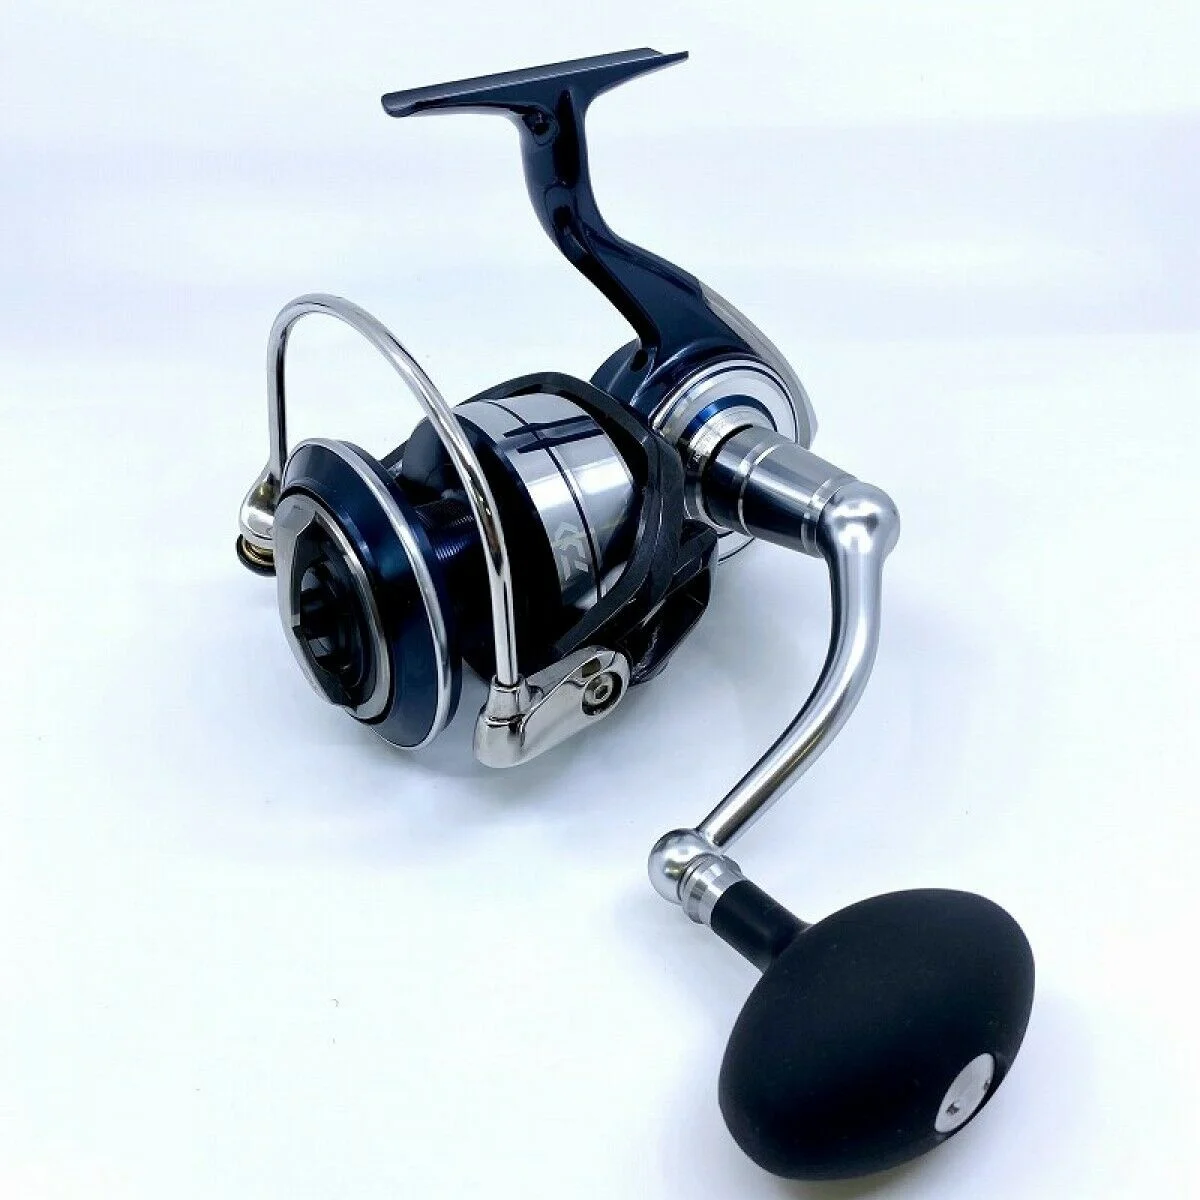 

Authentic buy 5 get 2 free Buy With Confidence New Outdoor Activities Daiwa Certate SW 14000-XH Spinning Reel